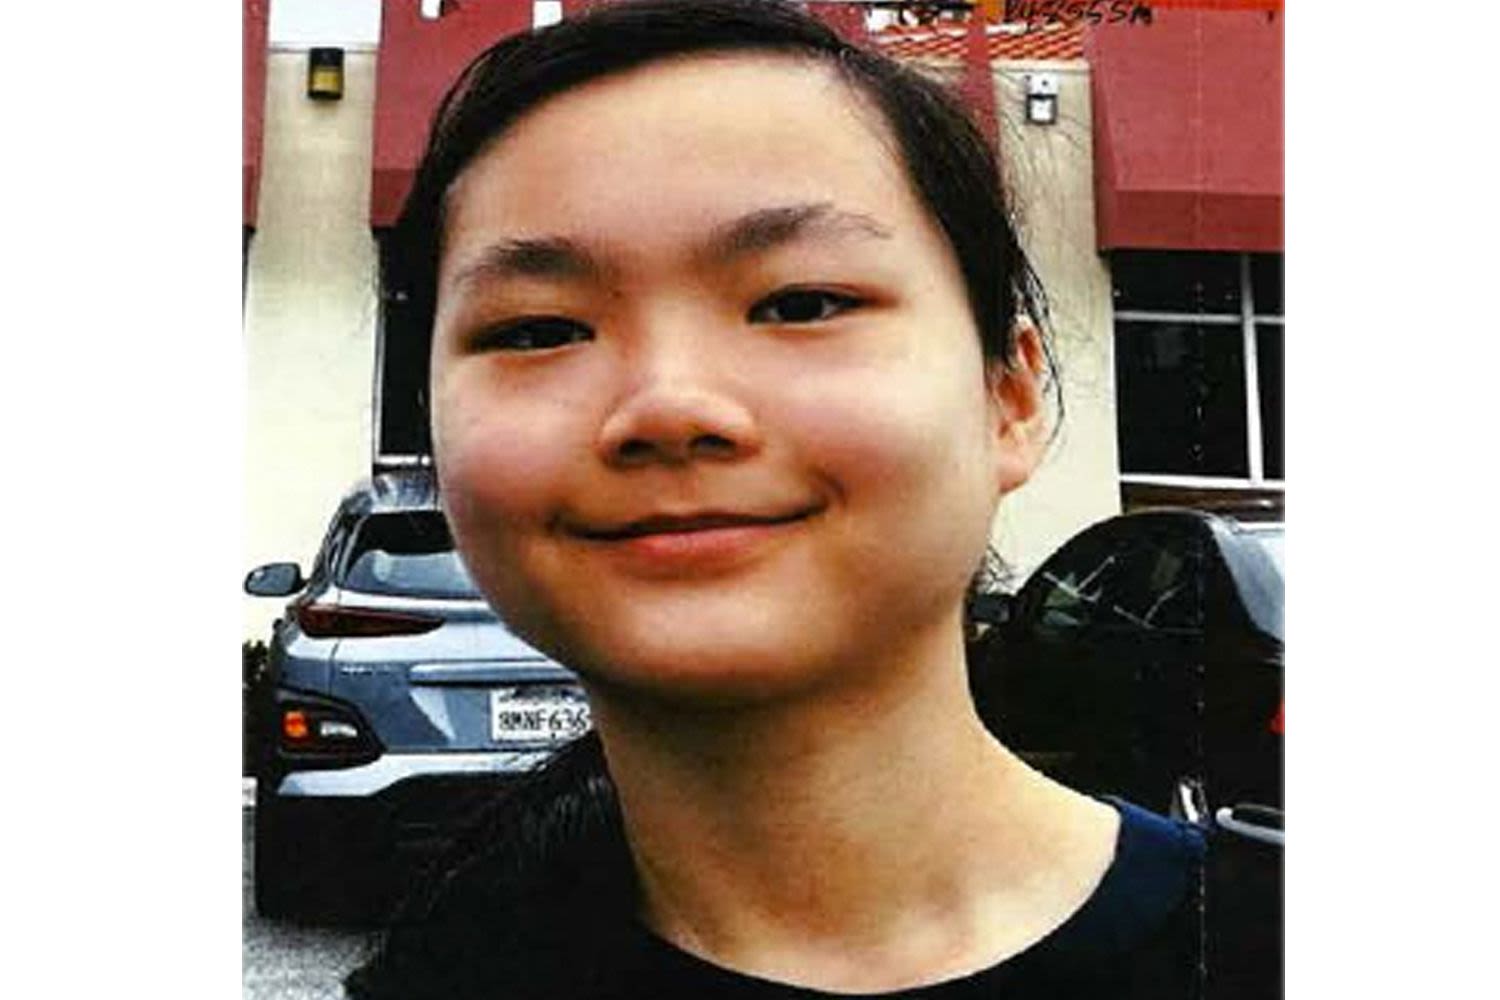 Alison Chao, Calif. Teen Who Went Missing During Bike Ride Last Week, Found Safe